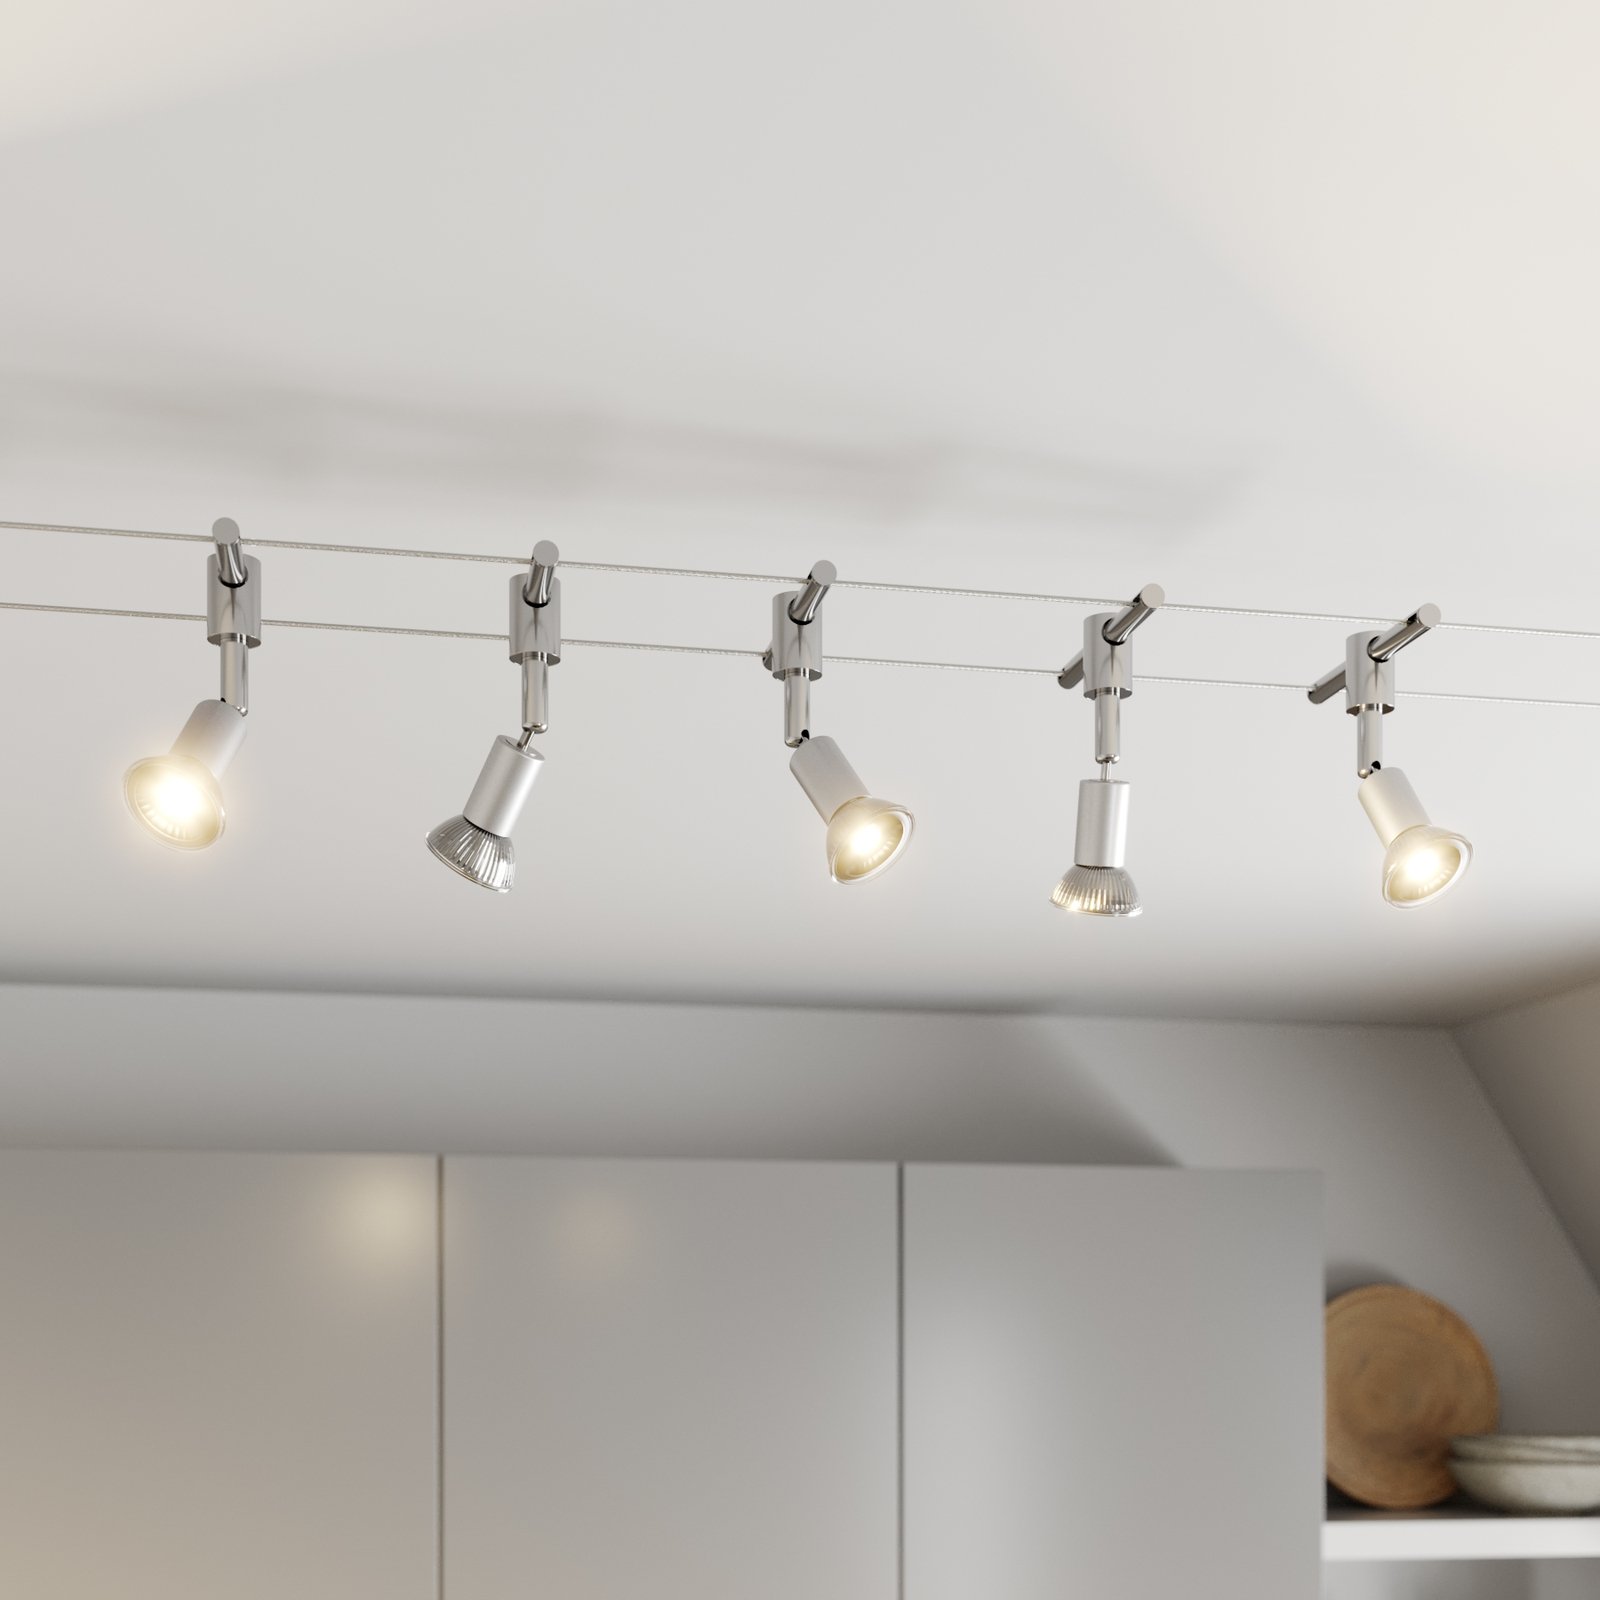 Rope cable lighting system with spotlights, 5-bulb